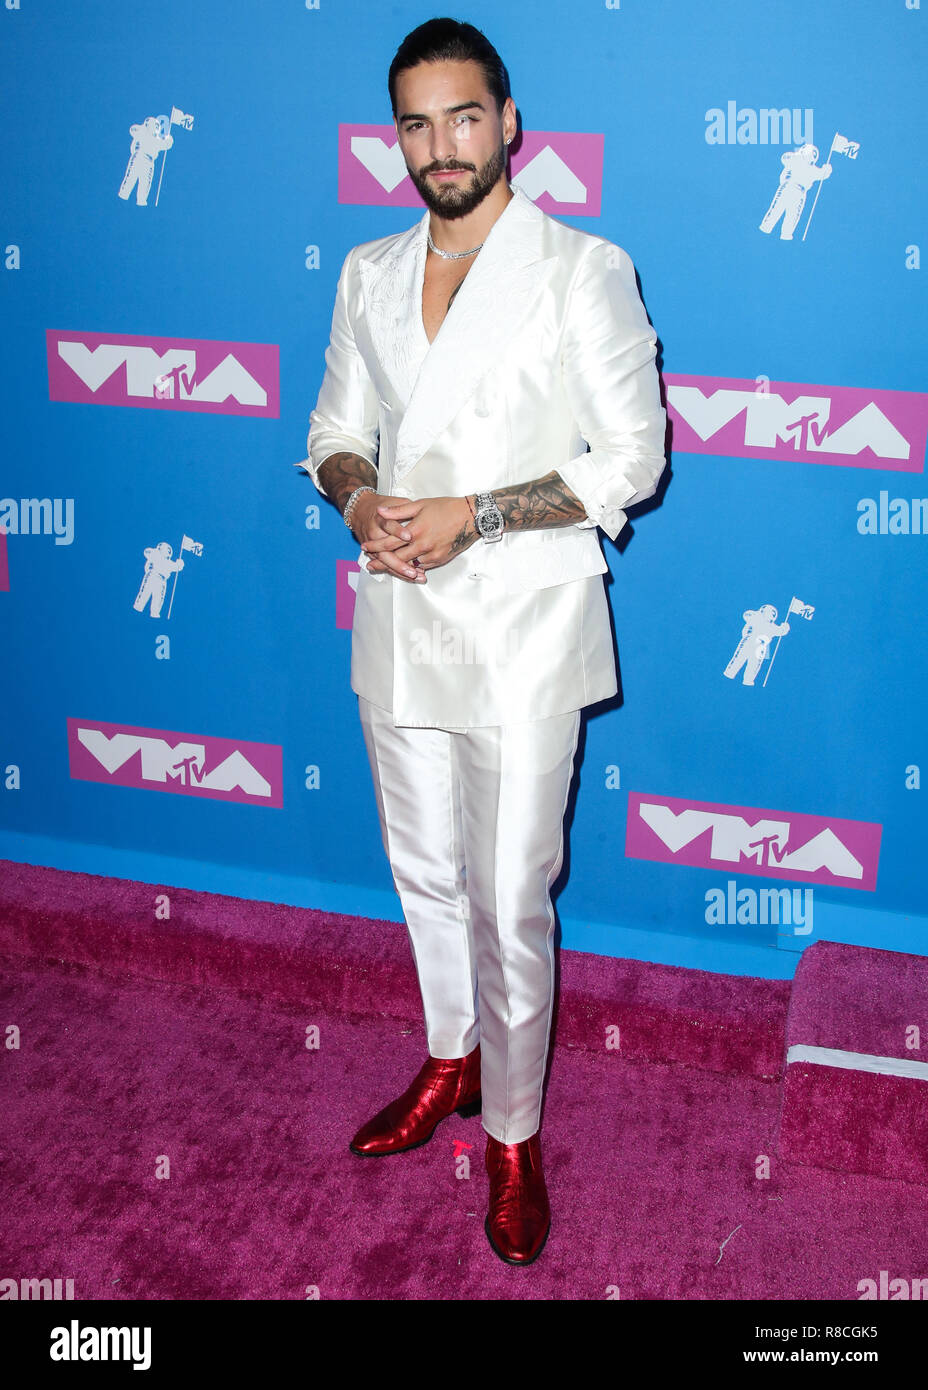 Maluma Turned the VMA's Stage Into a Paris Fashion Week Preview